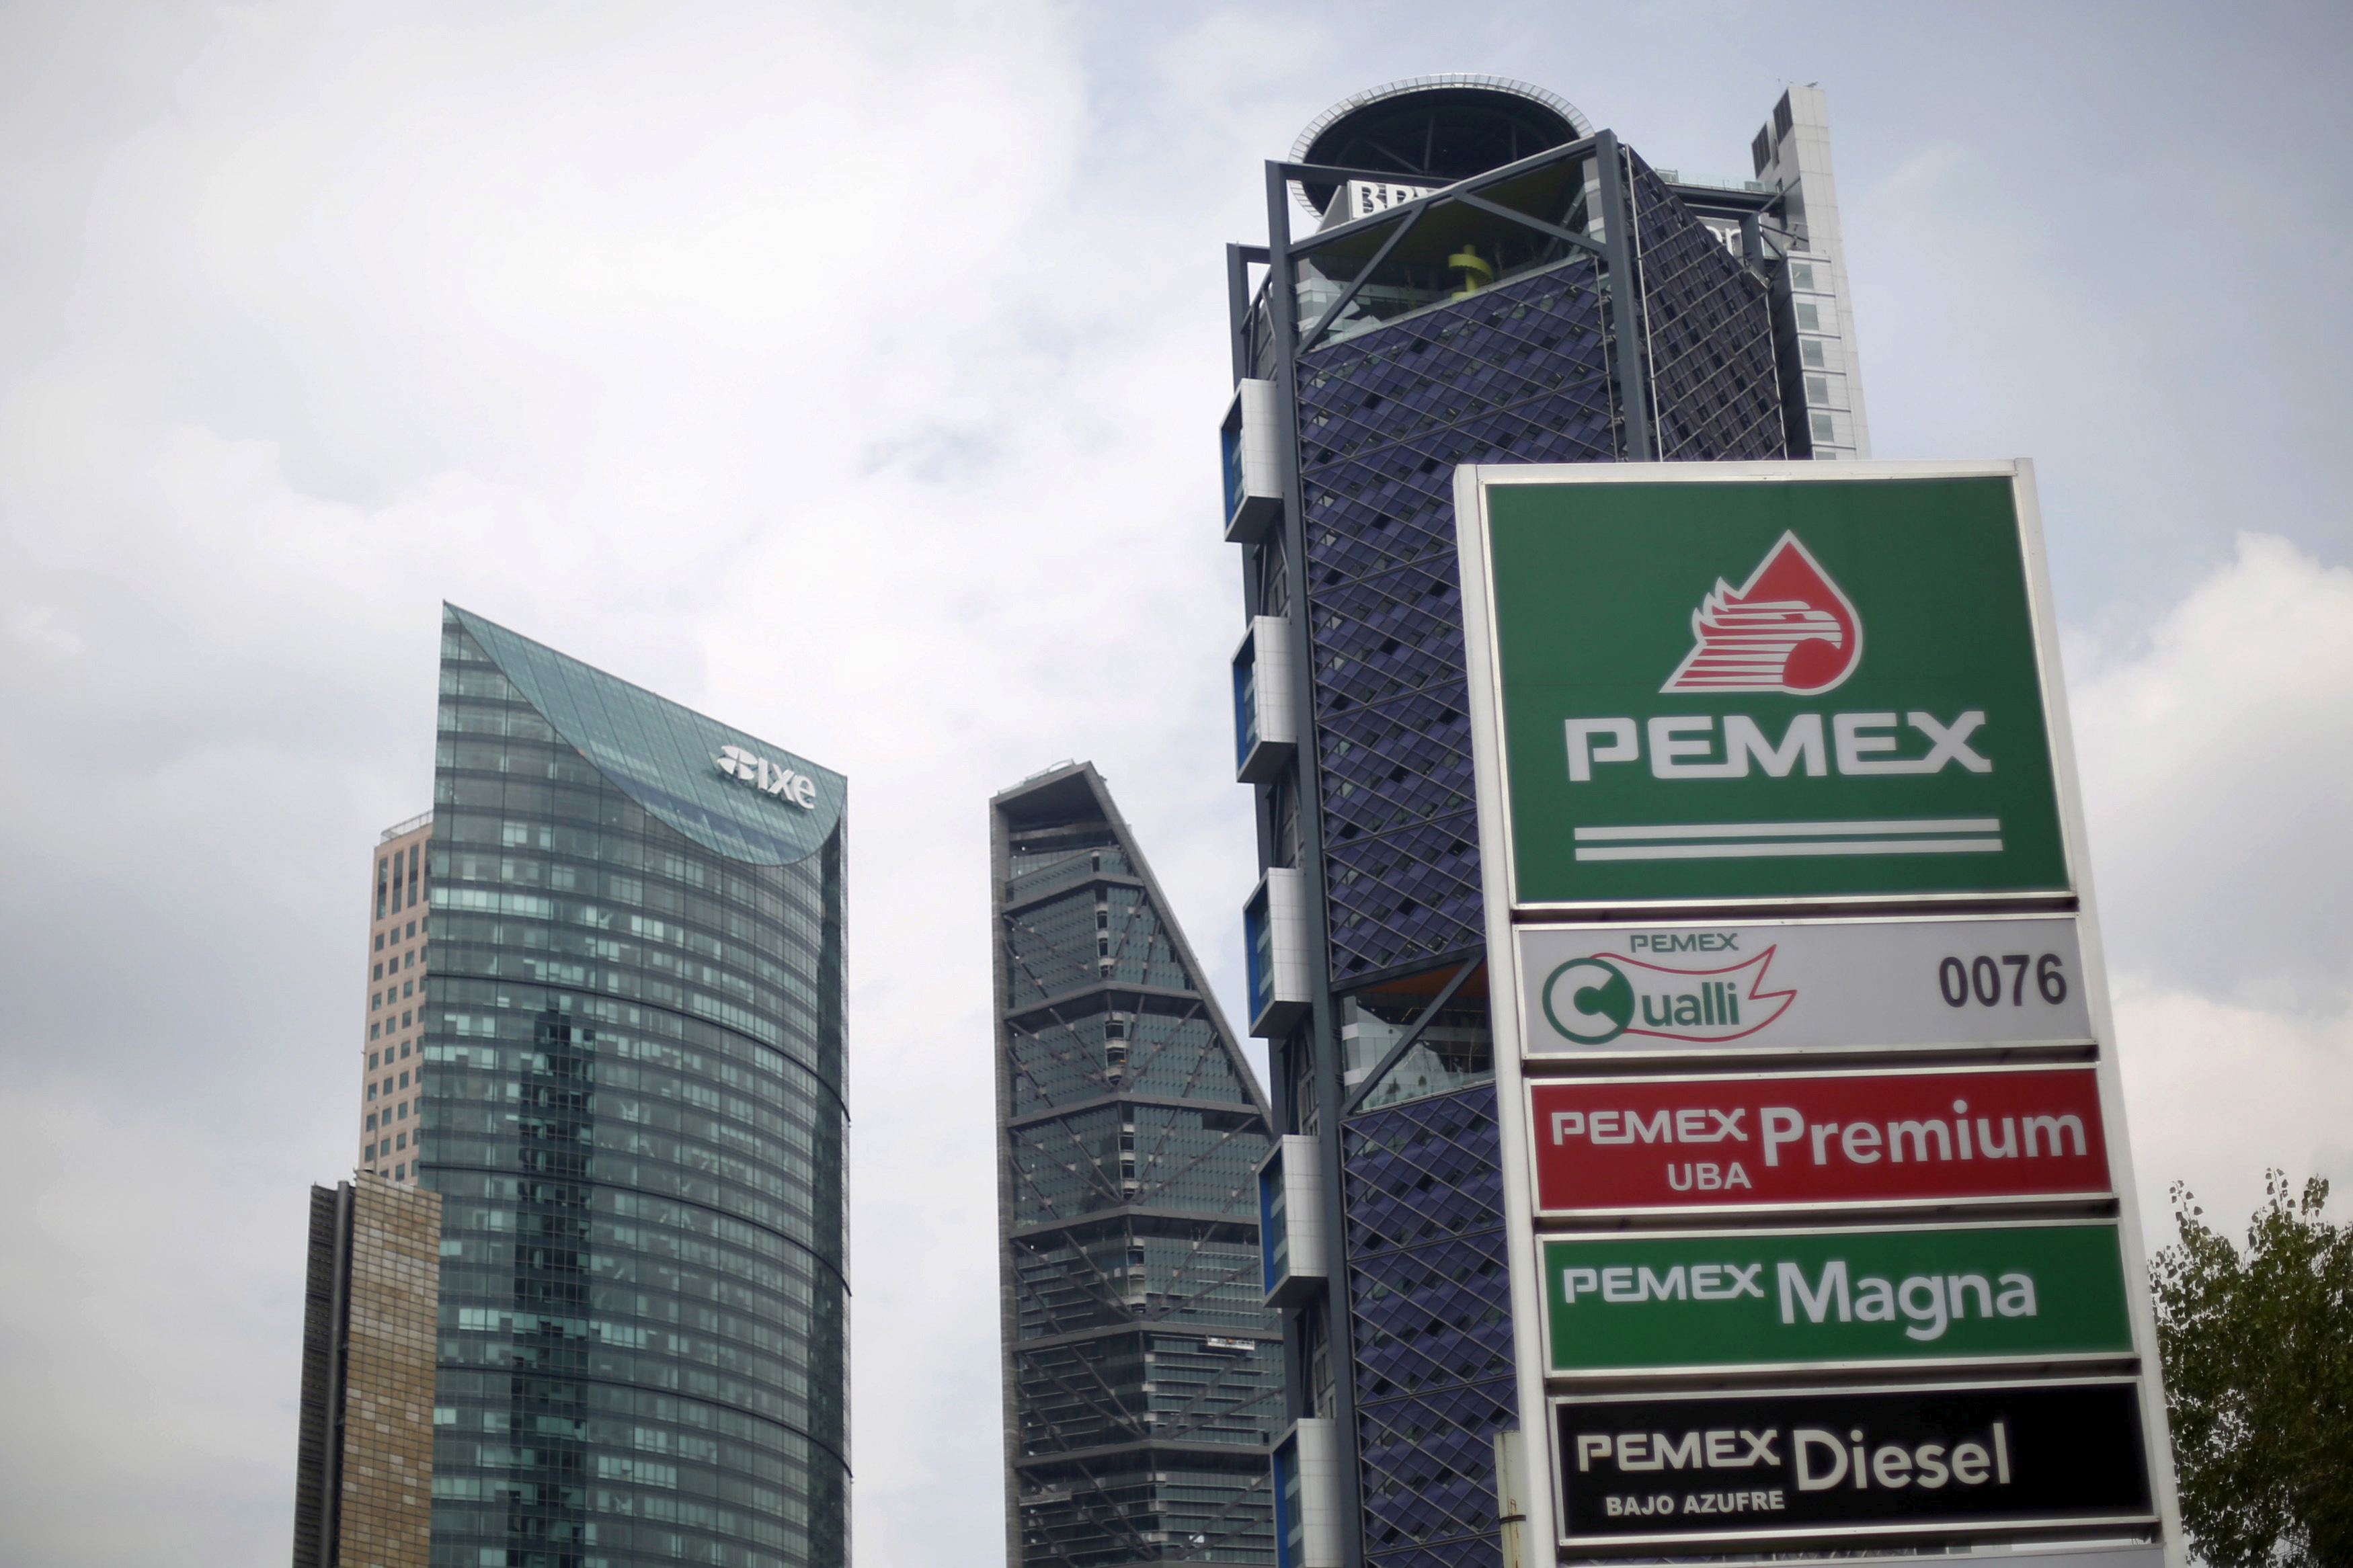 A Pemex gas station is seen in Mexico City